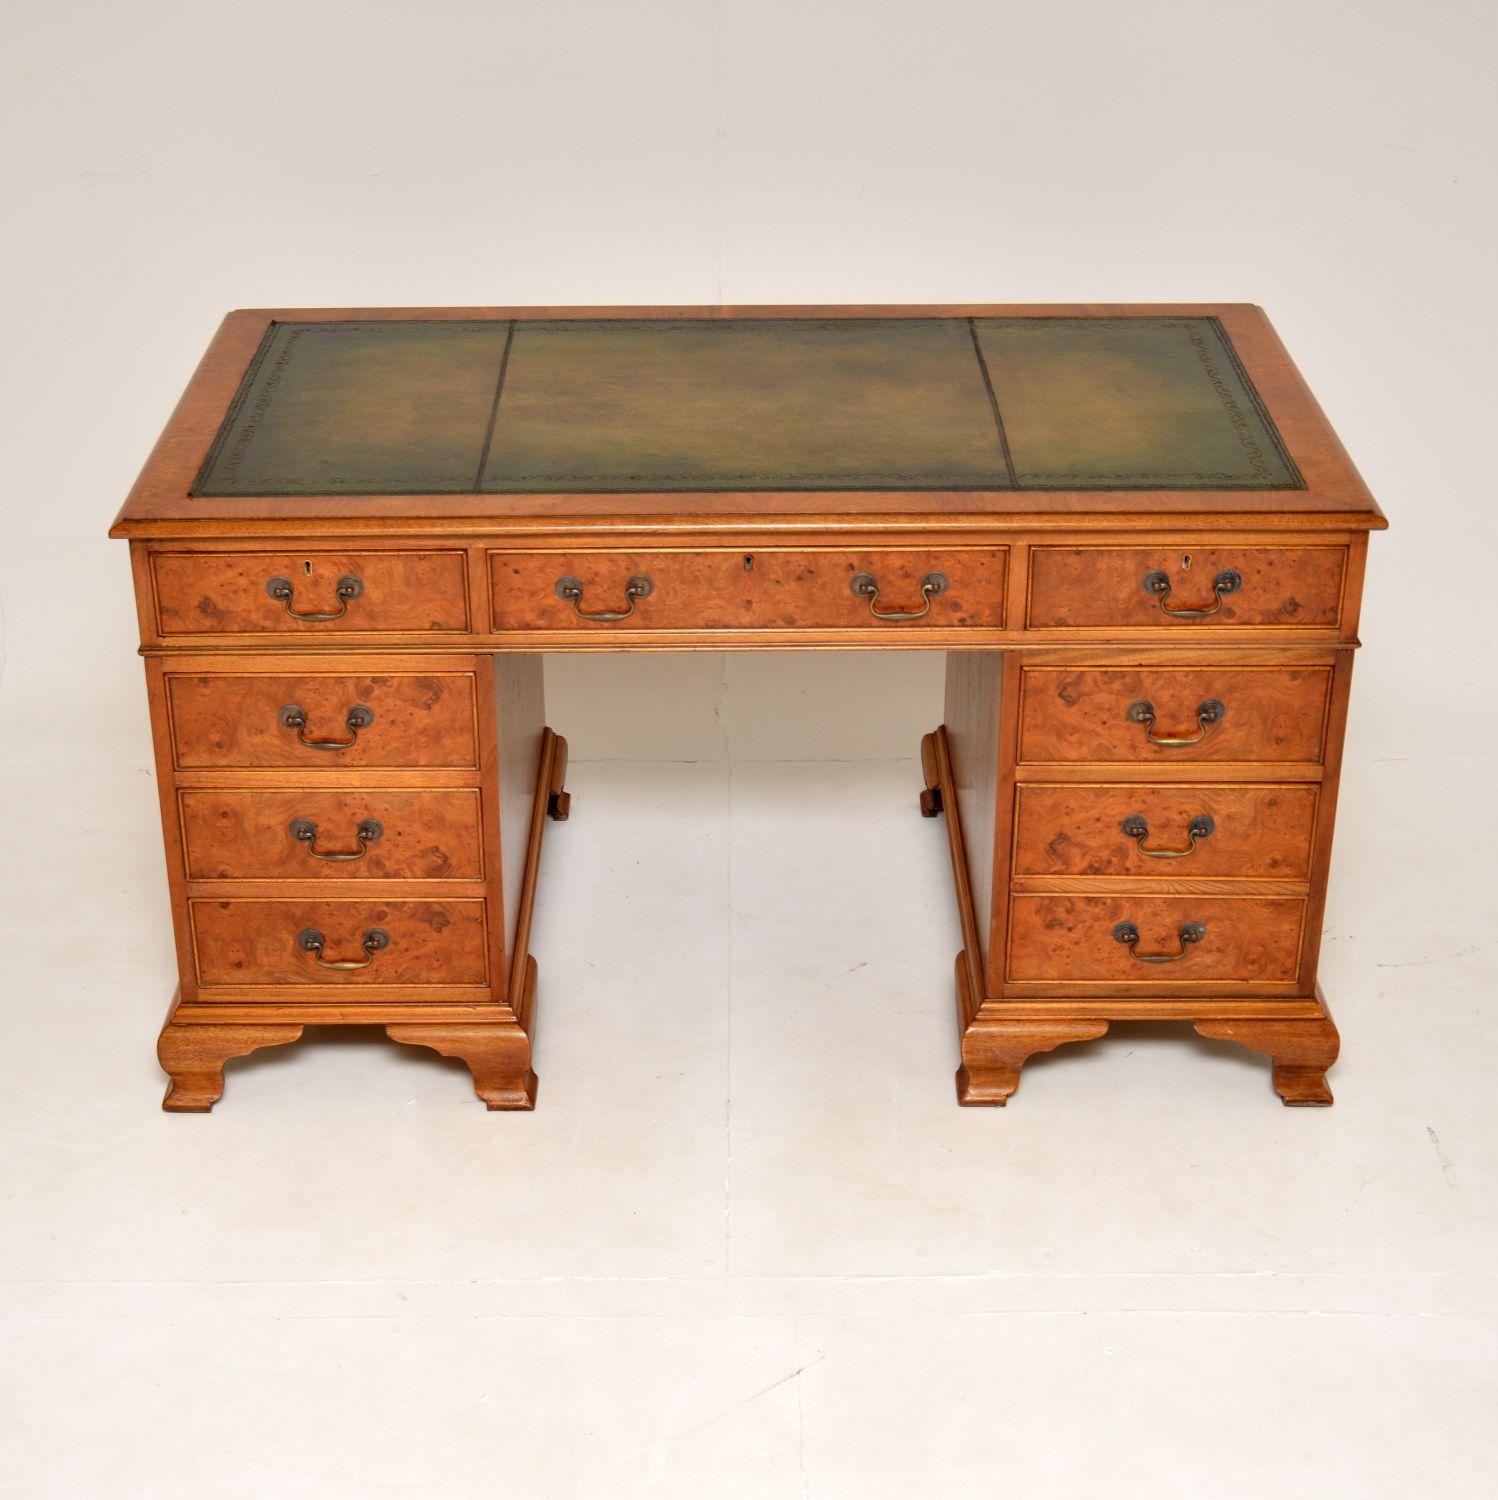 A stunning antique pedestal desk, beautifully finished in burr elm. This was made in England, it dates from around the 1950’s.

The quality is amazing, this is a very well made and useful item. The burr elm has a gorgeous, light colour tone and